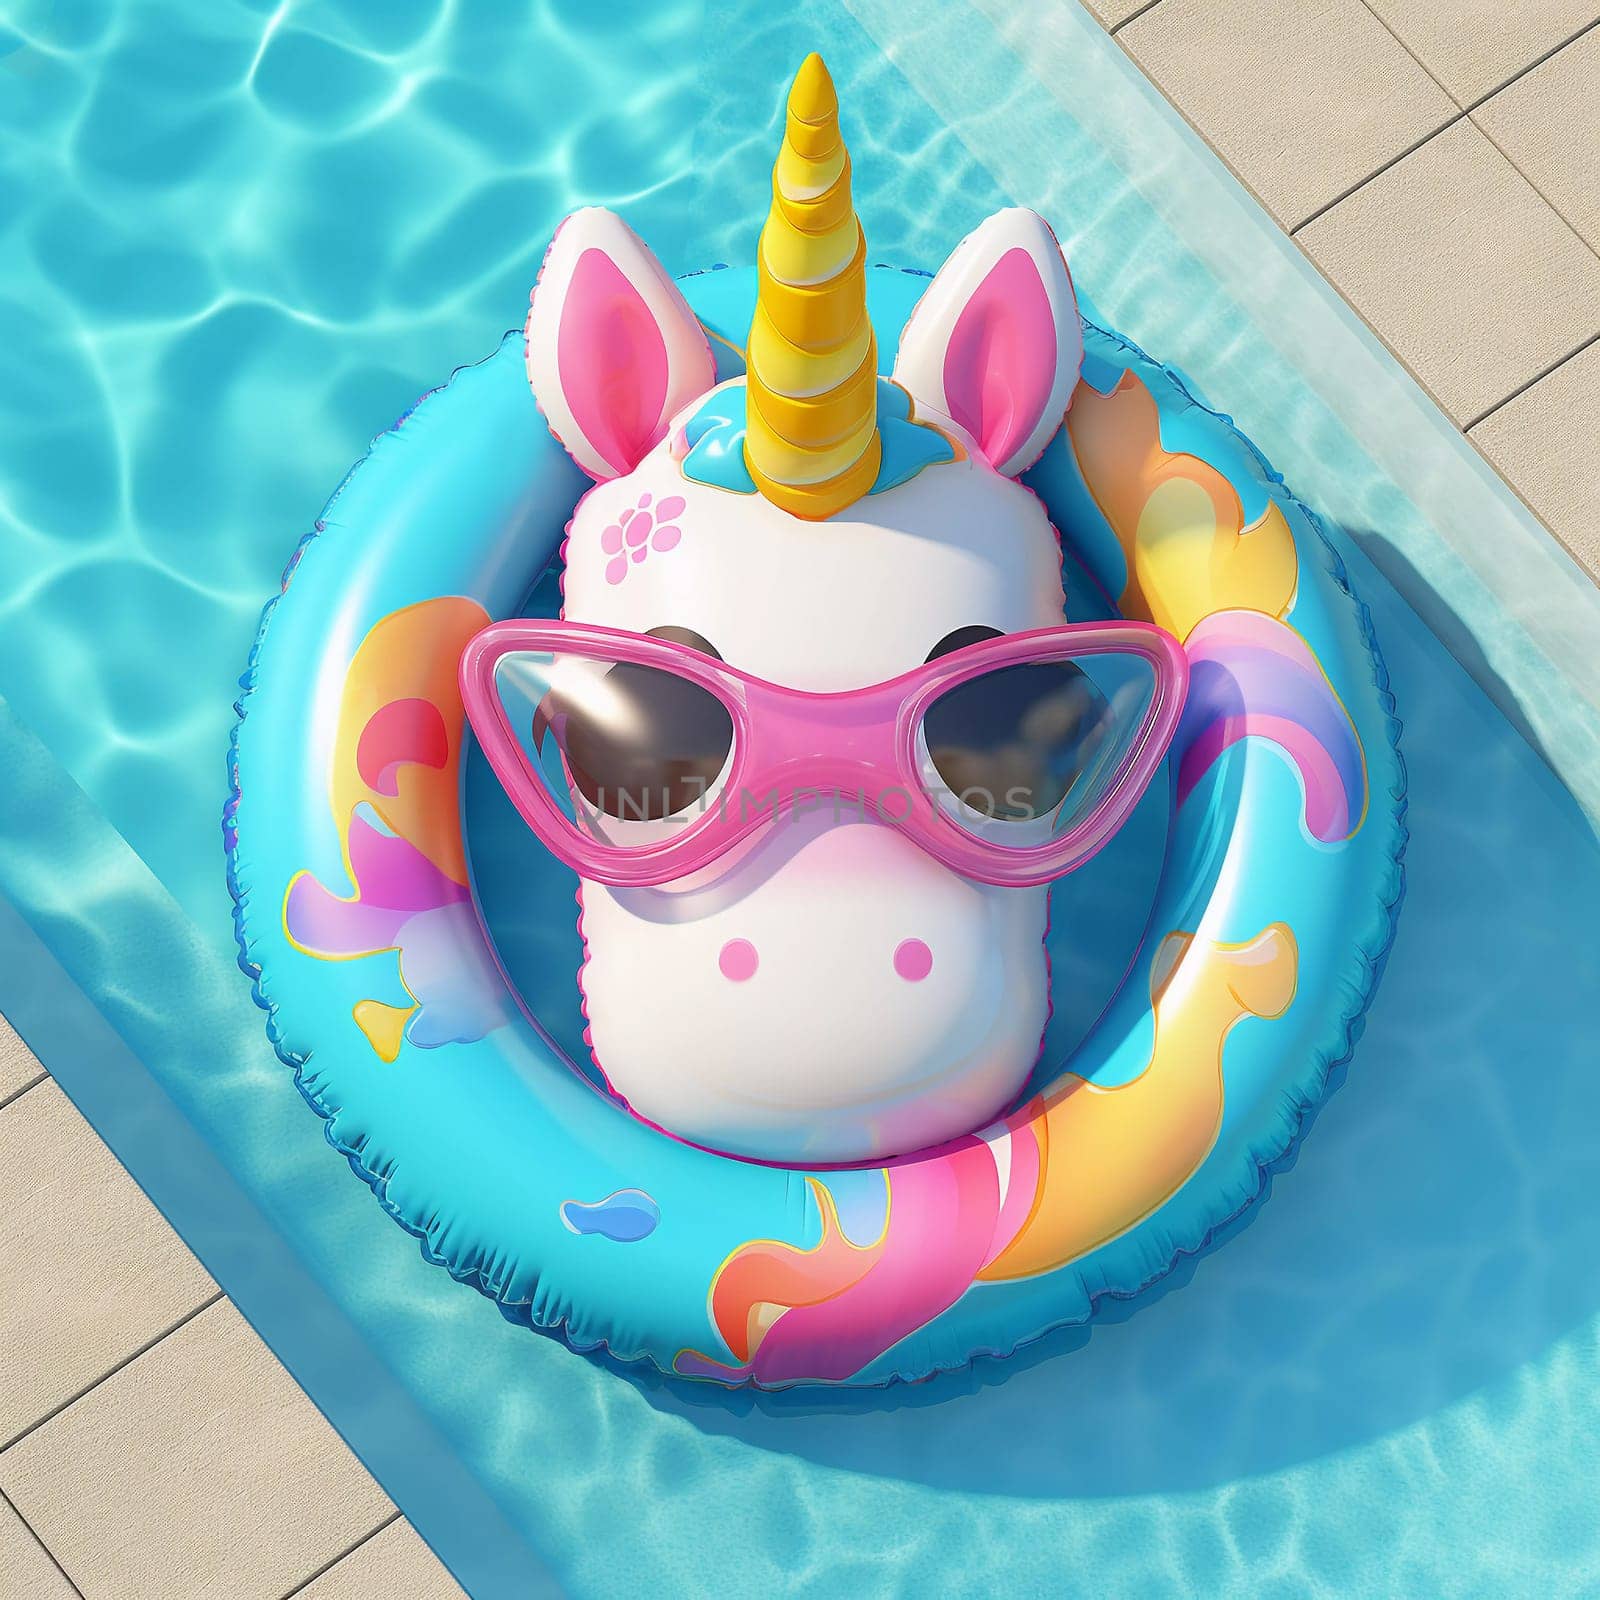 Unicorn Air Mattress. Floats on the surface of the water in the pool. Summer colorful vacation background.